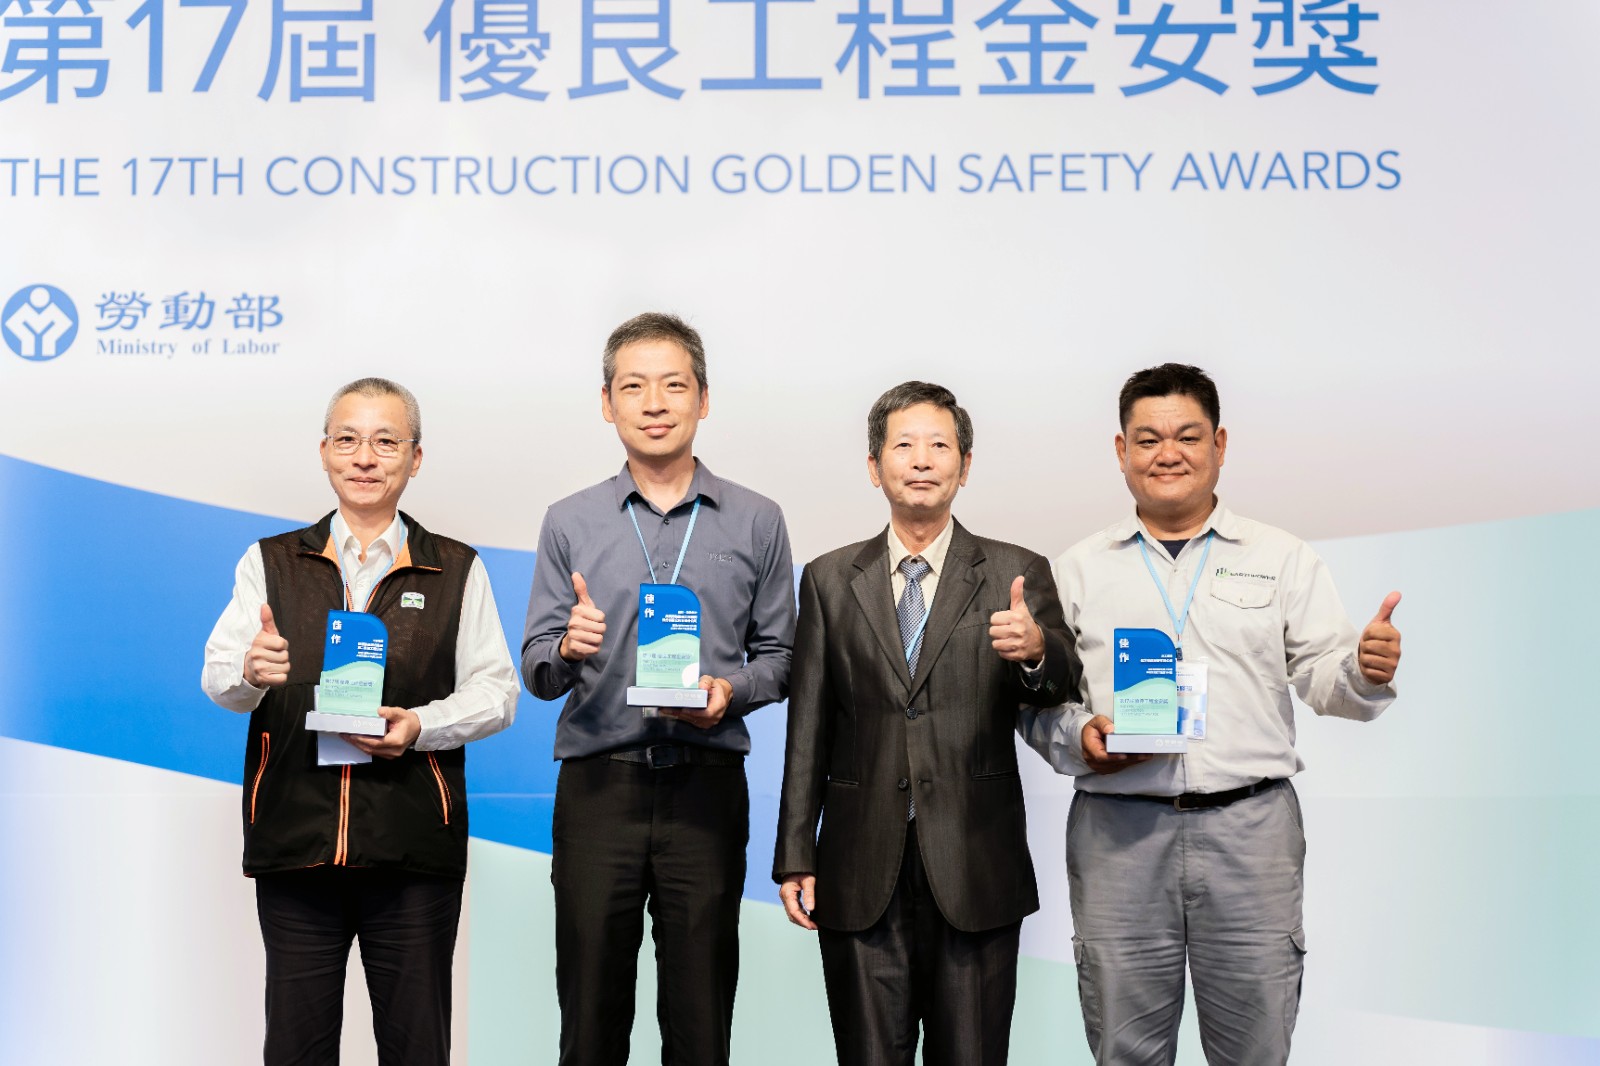 【Golden Safety Award of Honorable Mention】National Highway No. 1 Addition of Connector to Provincial Highway No. 74 System Interchange Project